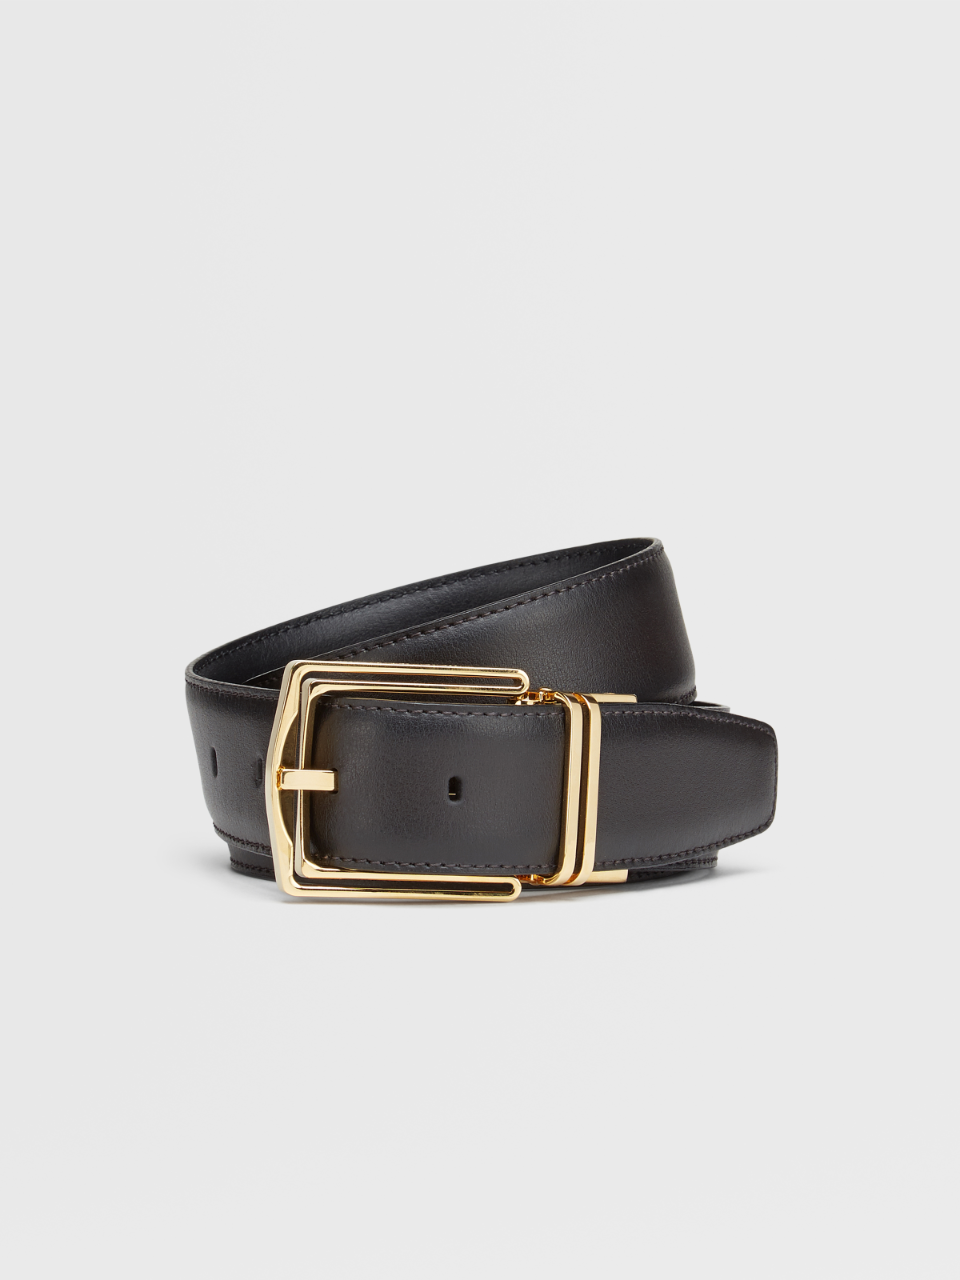 Dark Brown Hand-buffed Leather and Black Grained Leather Reversible Belt